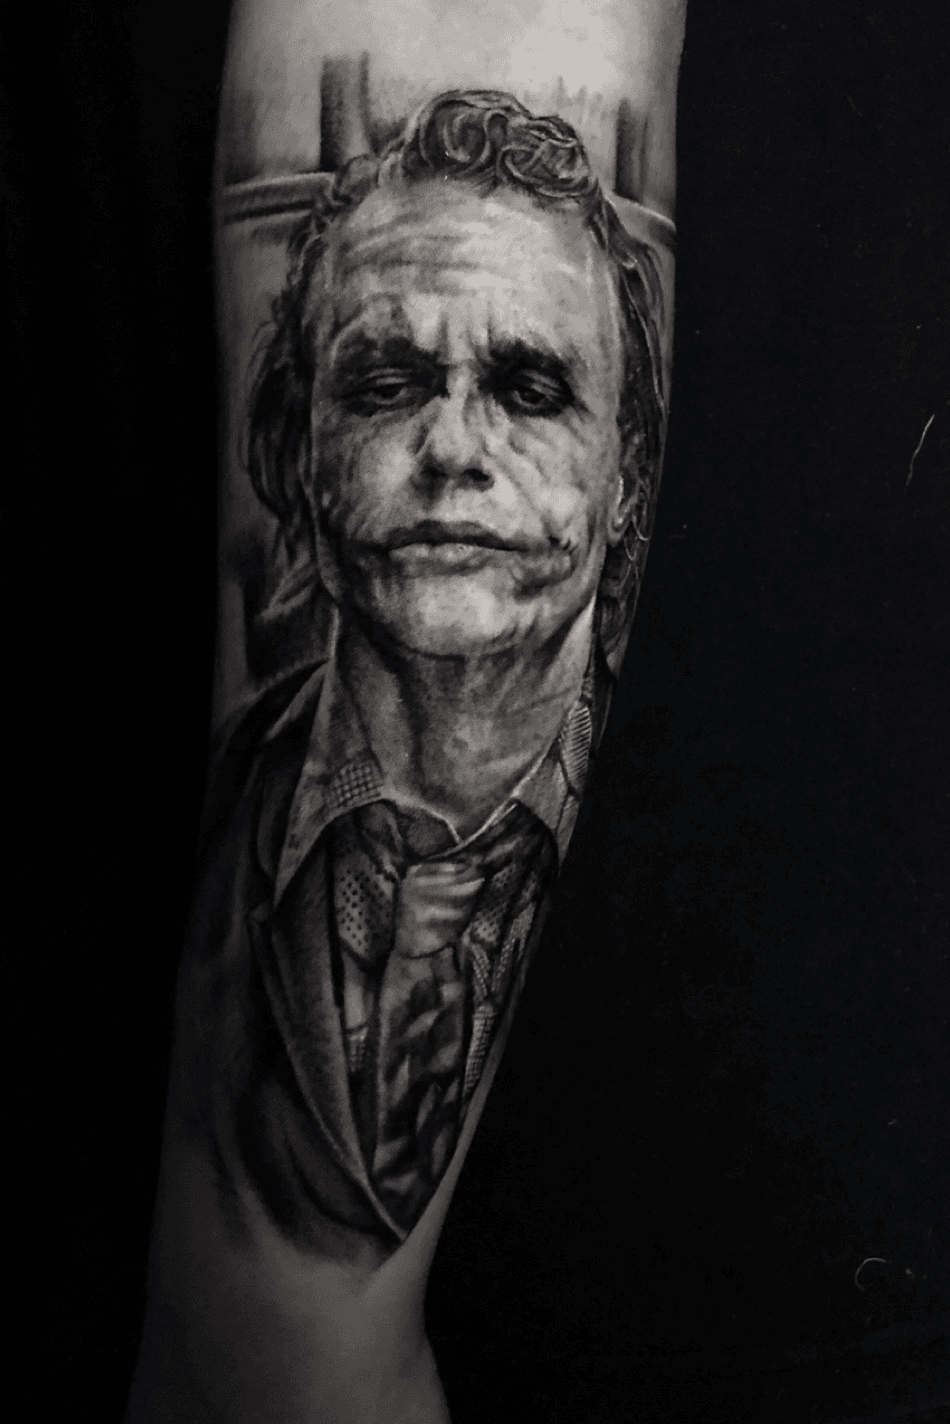 10 Simple Joker Tattoo Ideas That Will Blow Your Mind  alexie